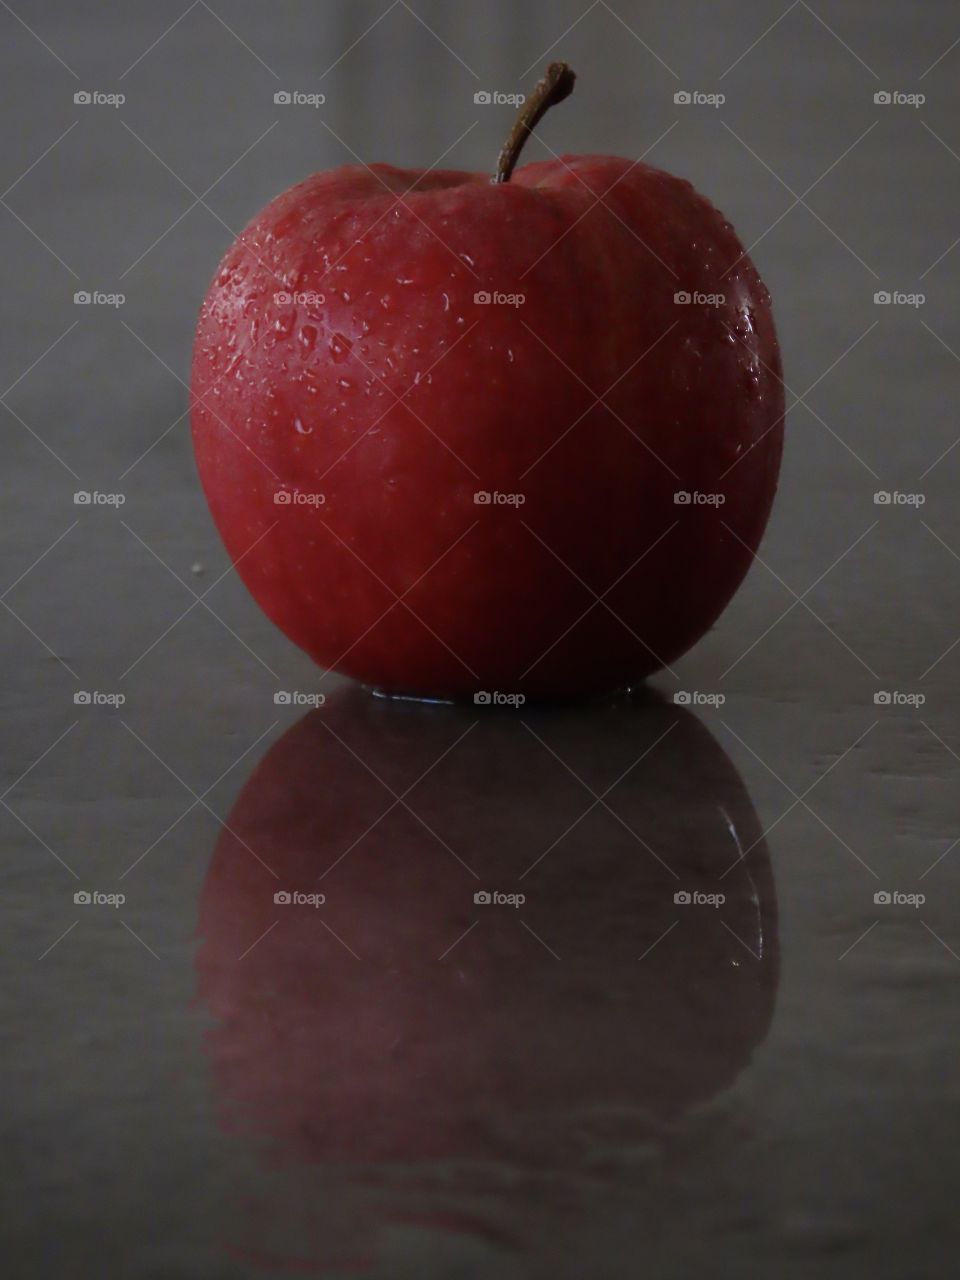 Red apple.